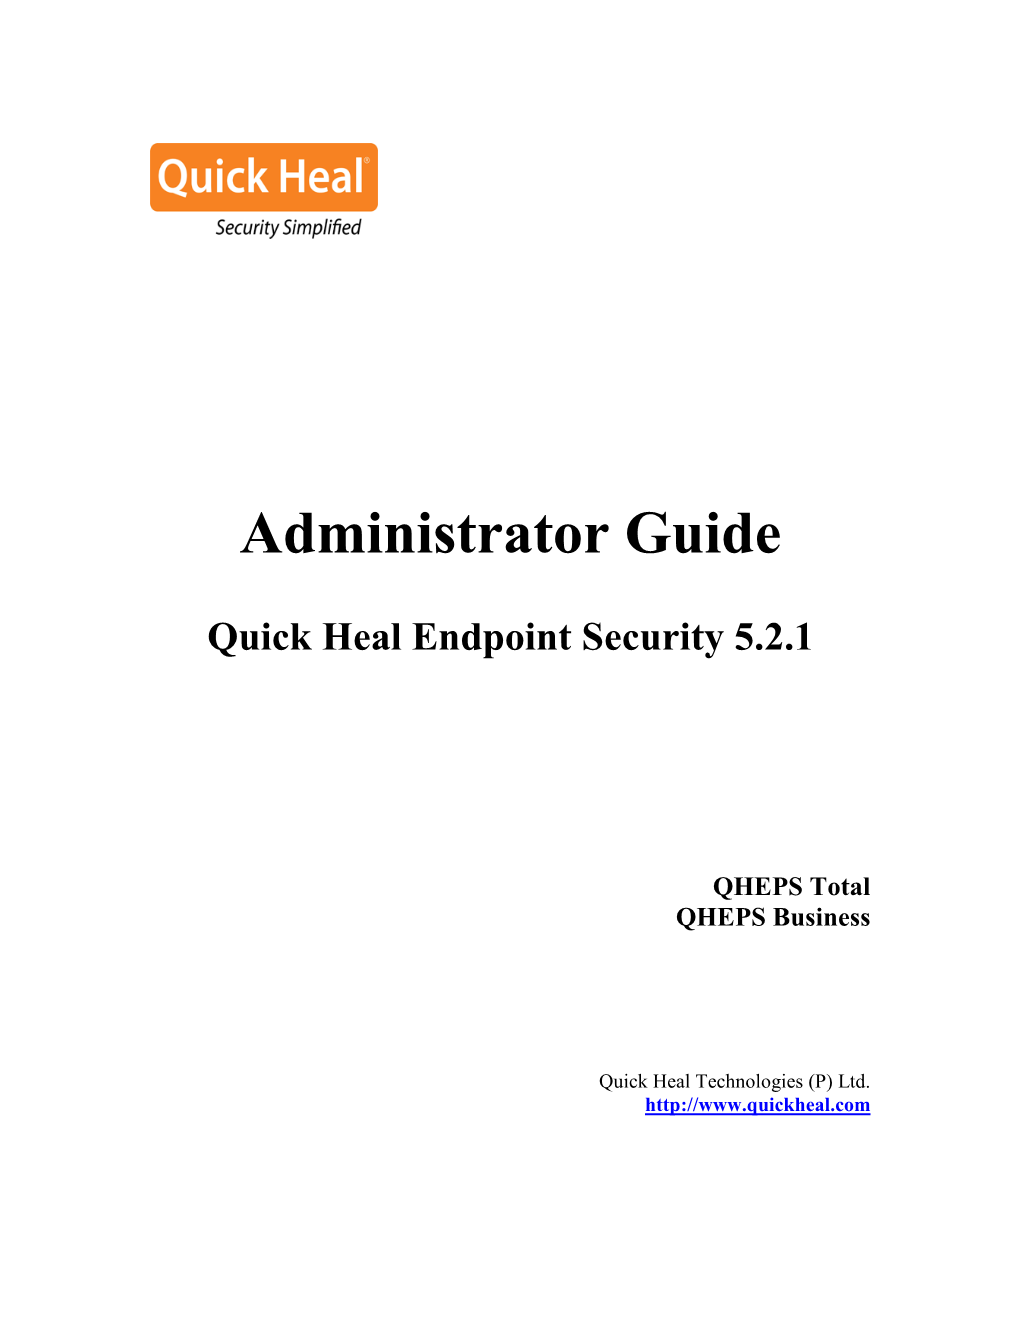 Quick Heal Endpoint Security 5.2.1